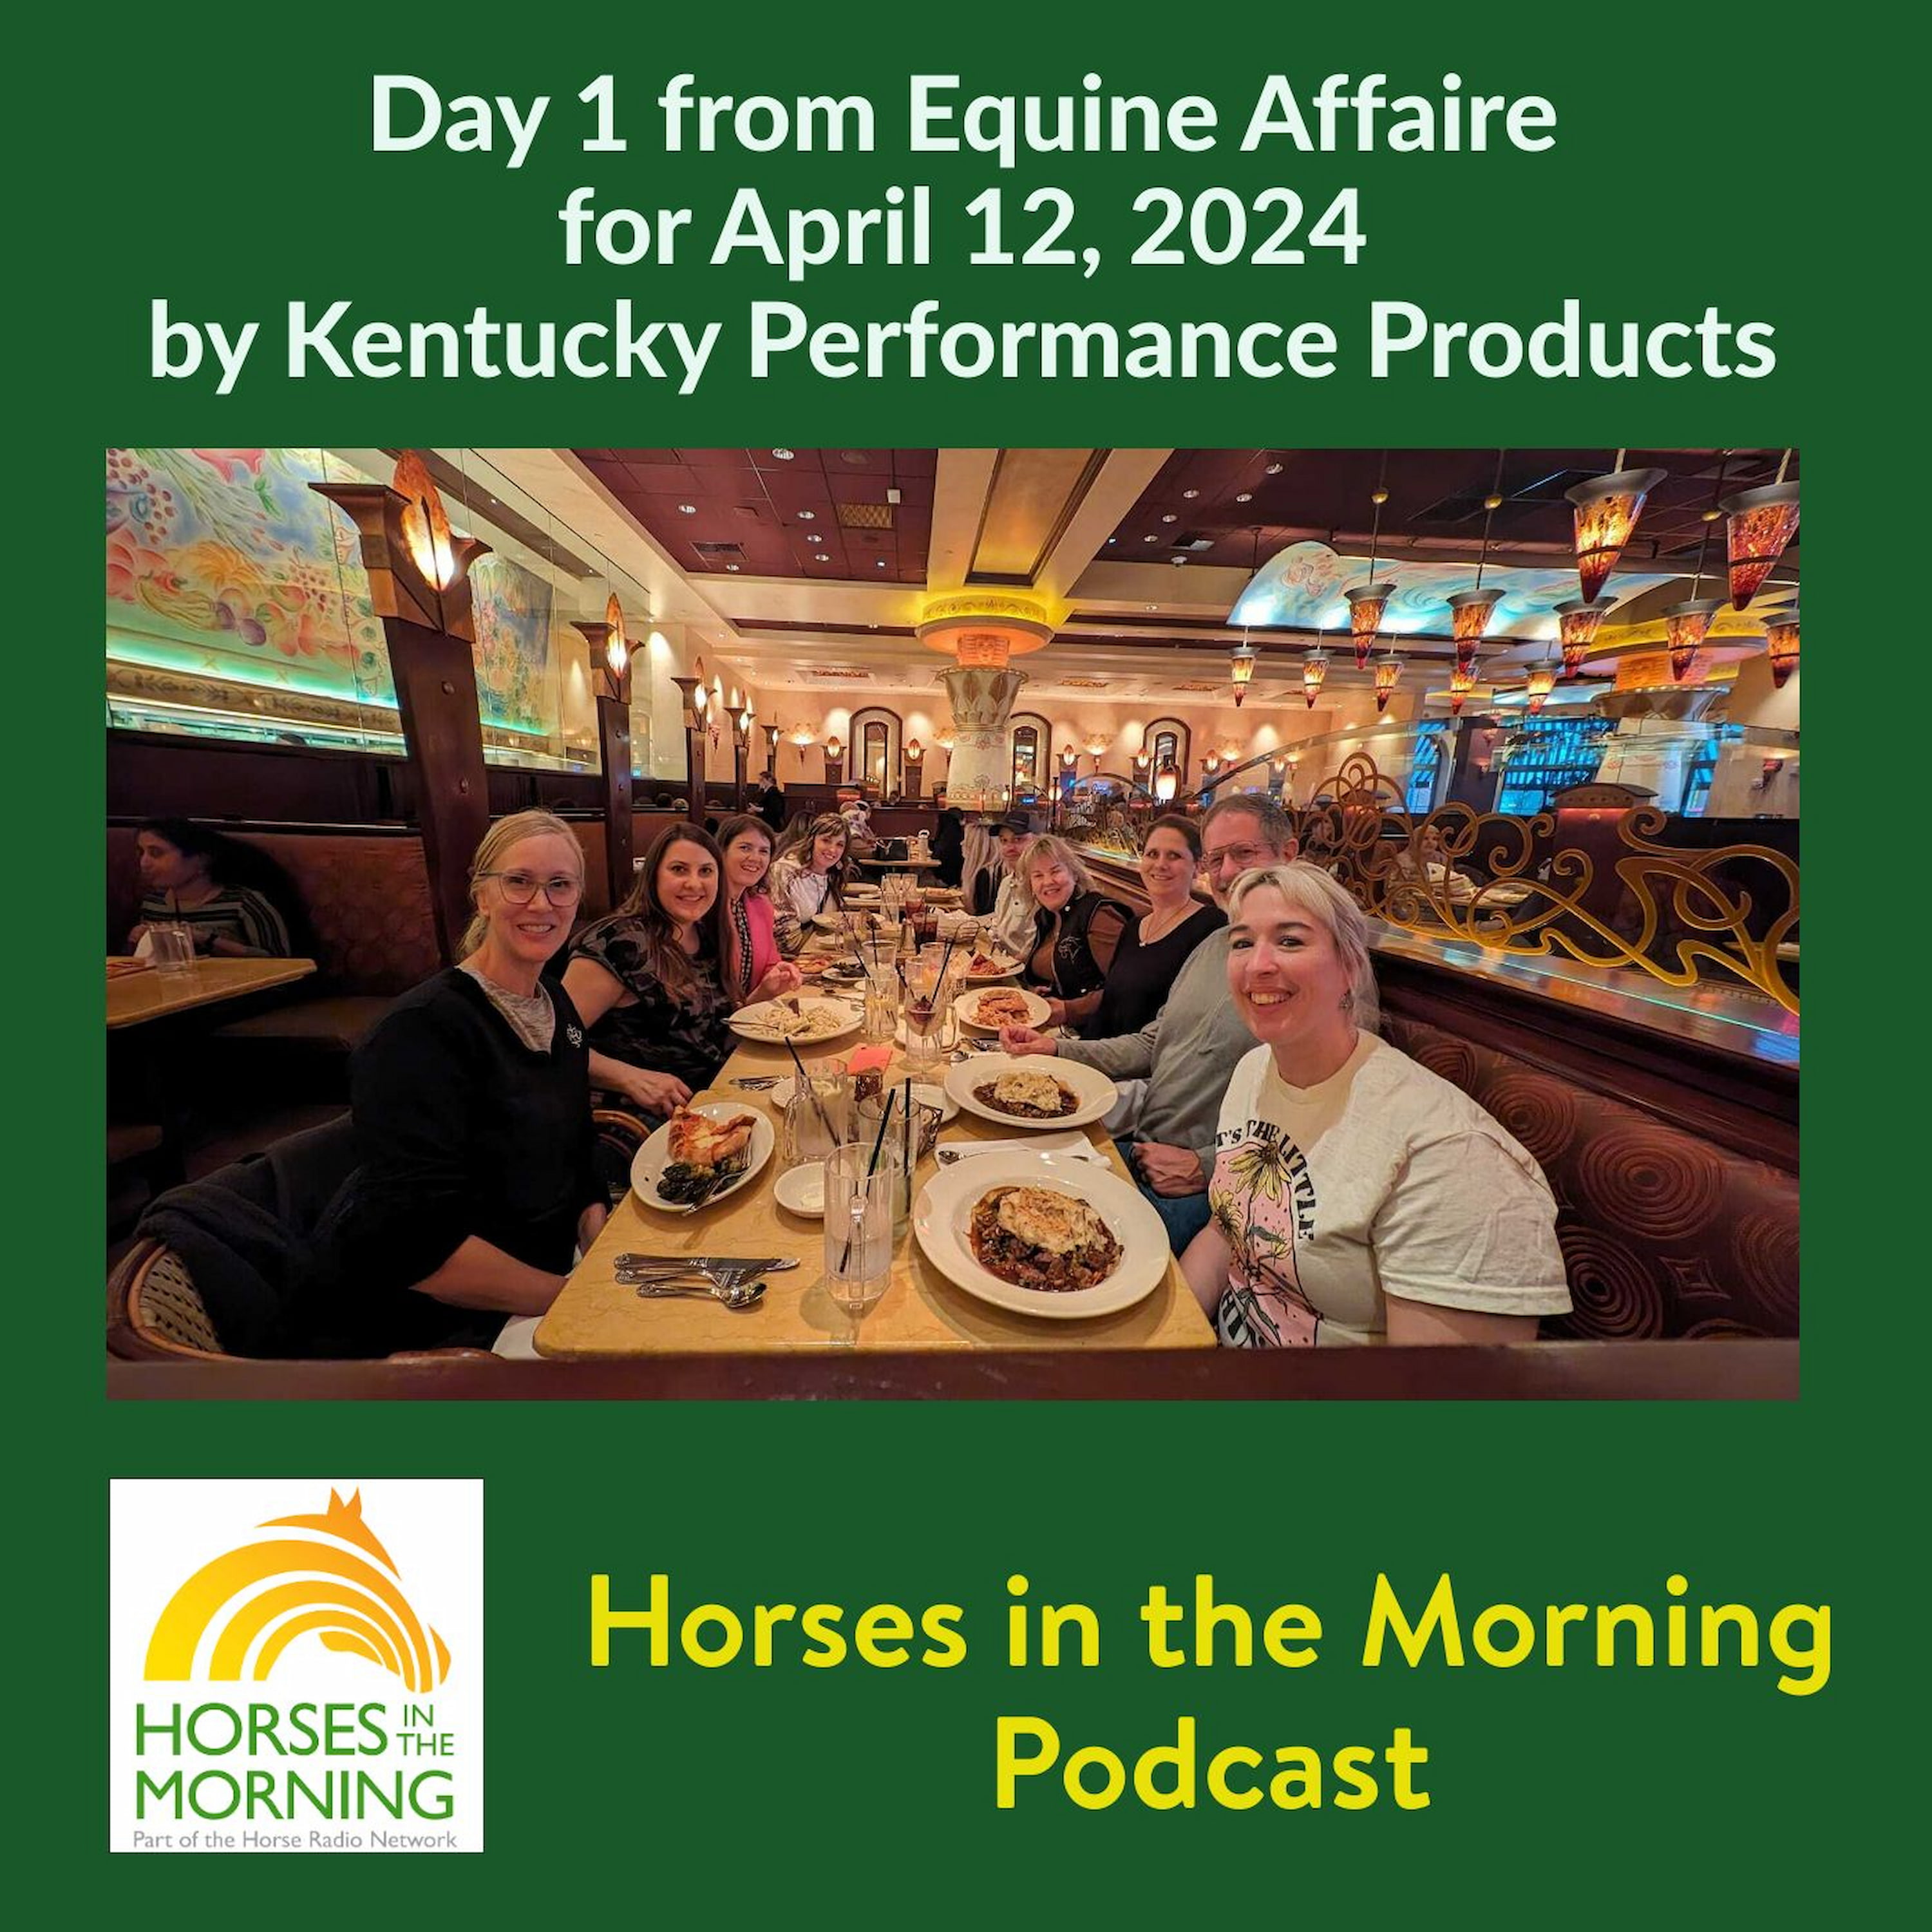 Day 1 from Equine Affaire for April 12, 2024 by Kentucky Performance Products